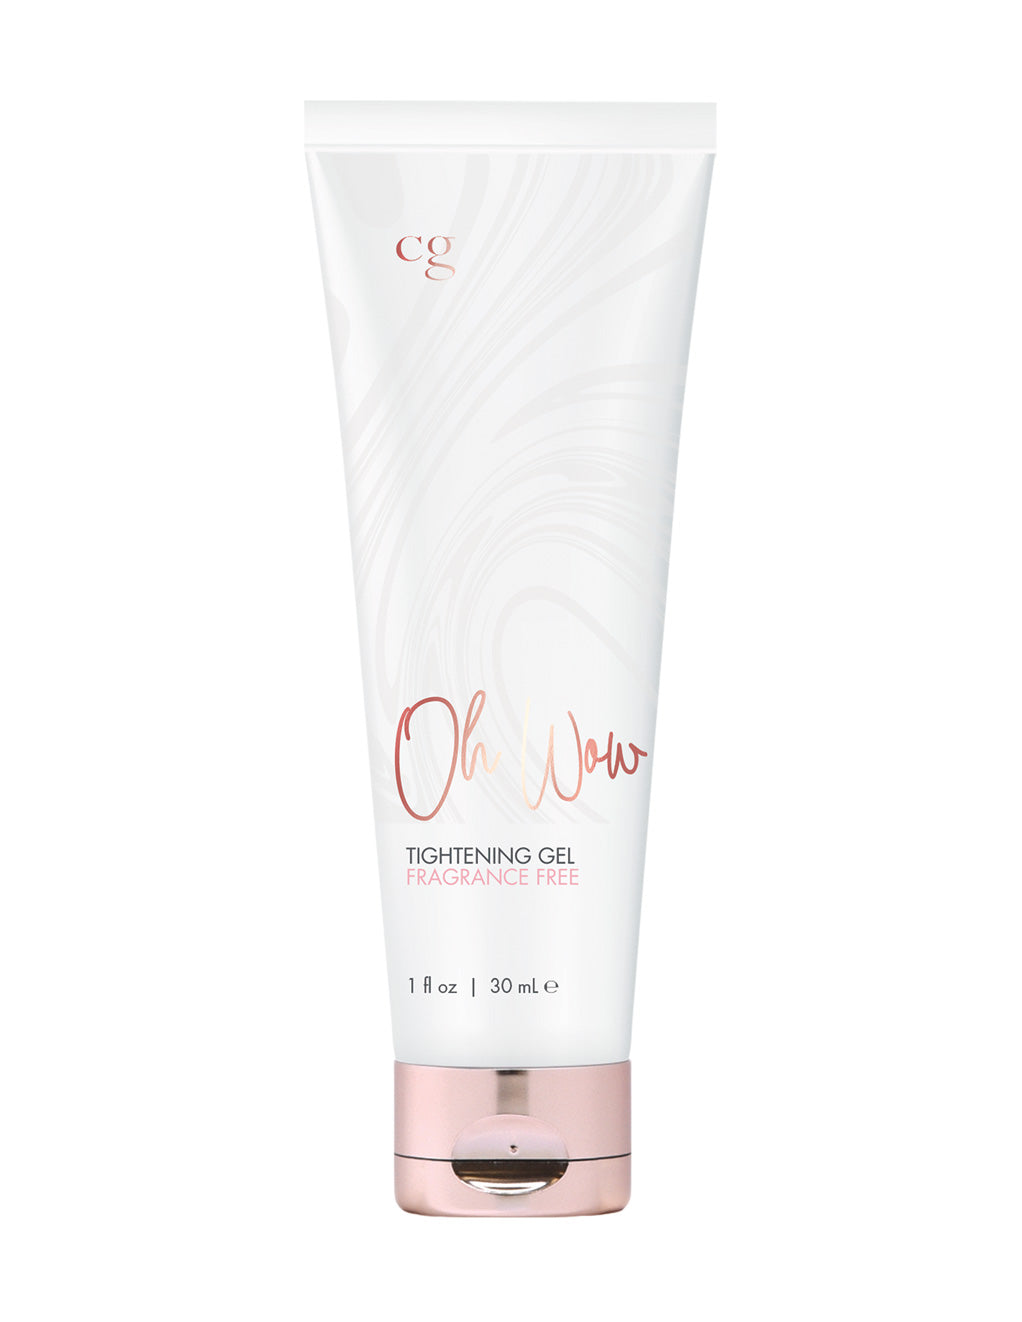 Oh Wow Tightening Gel 1oz Tube Front